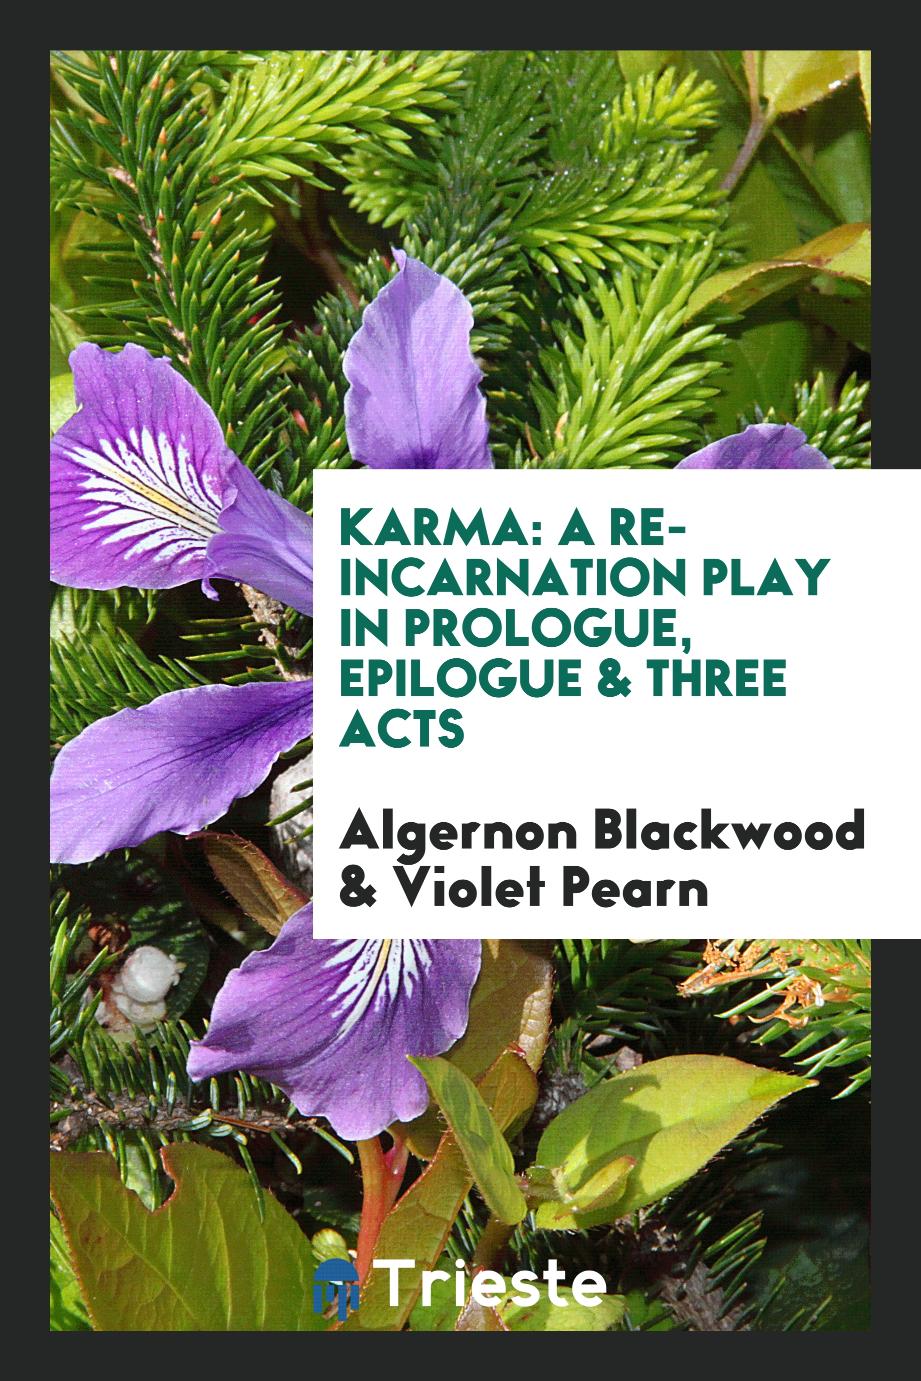 Karma: a re-incarnation play in prologue, epilogue & three acts